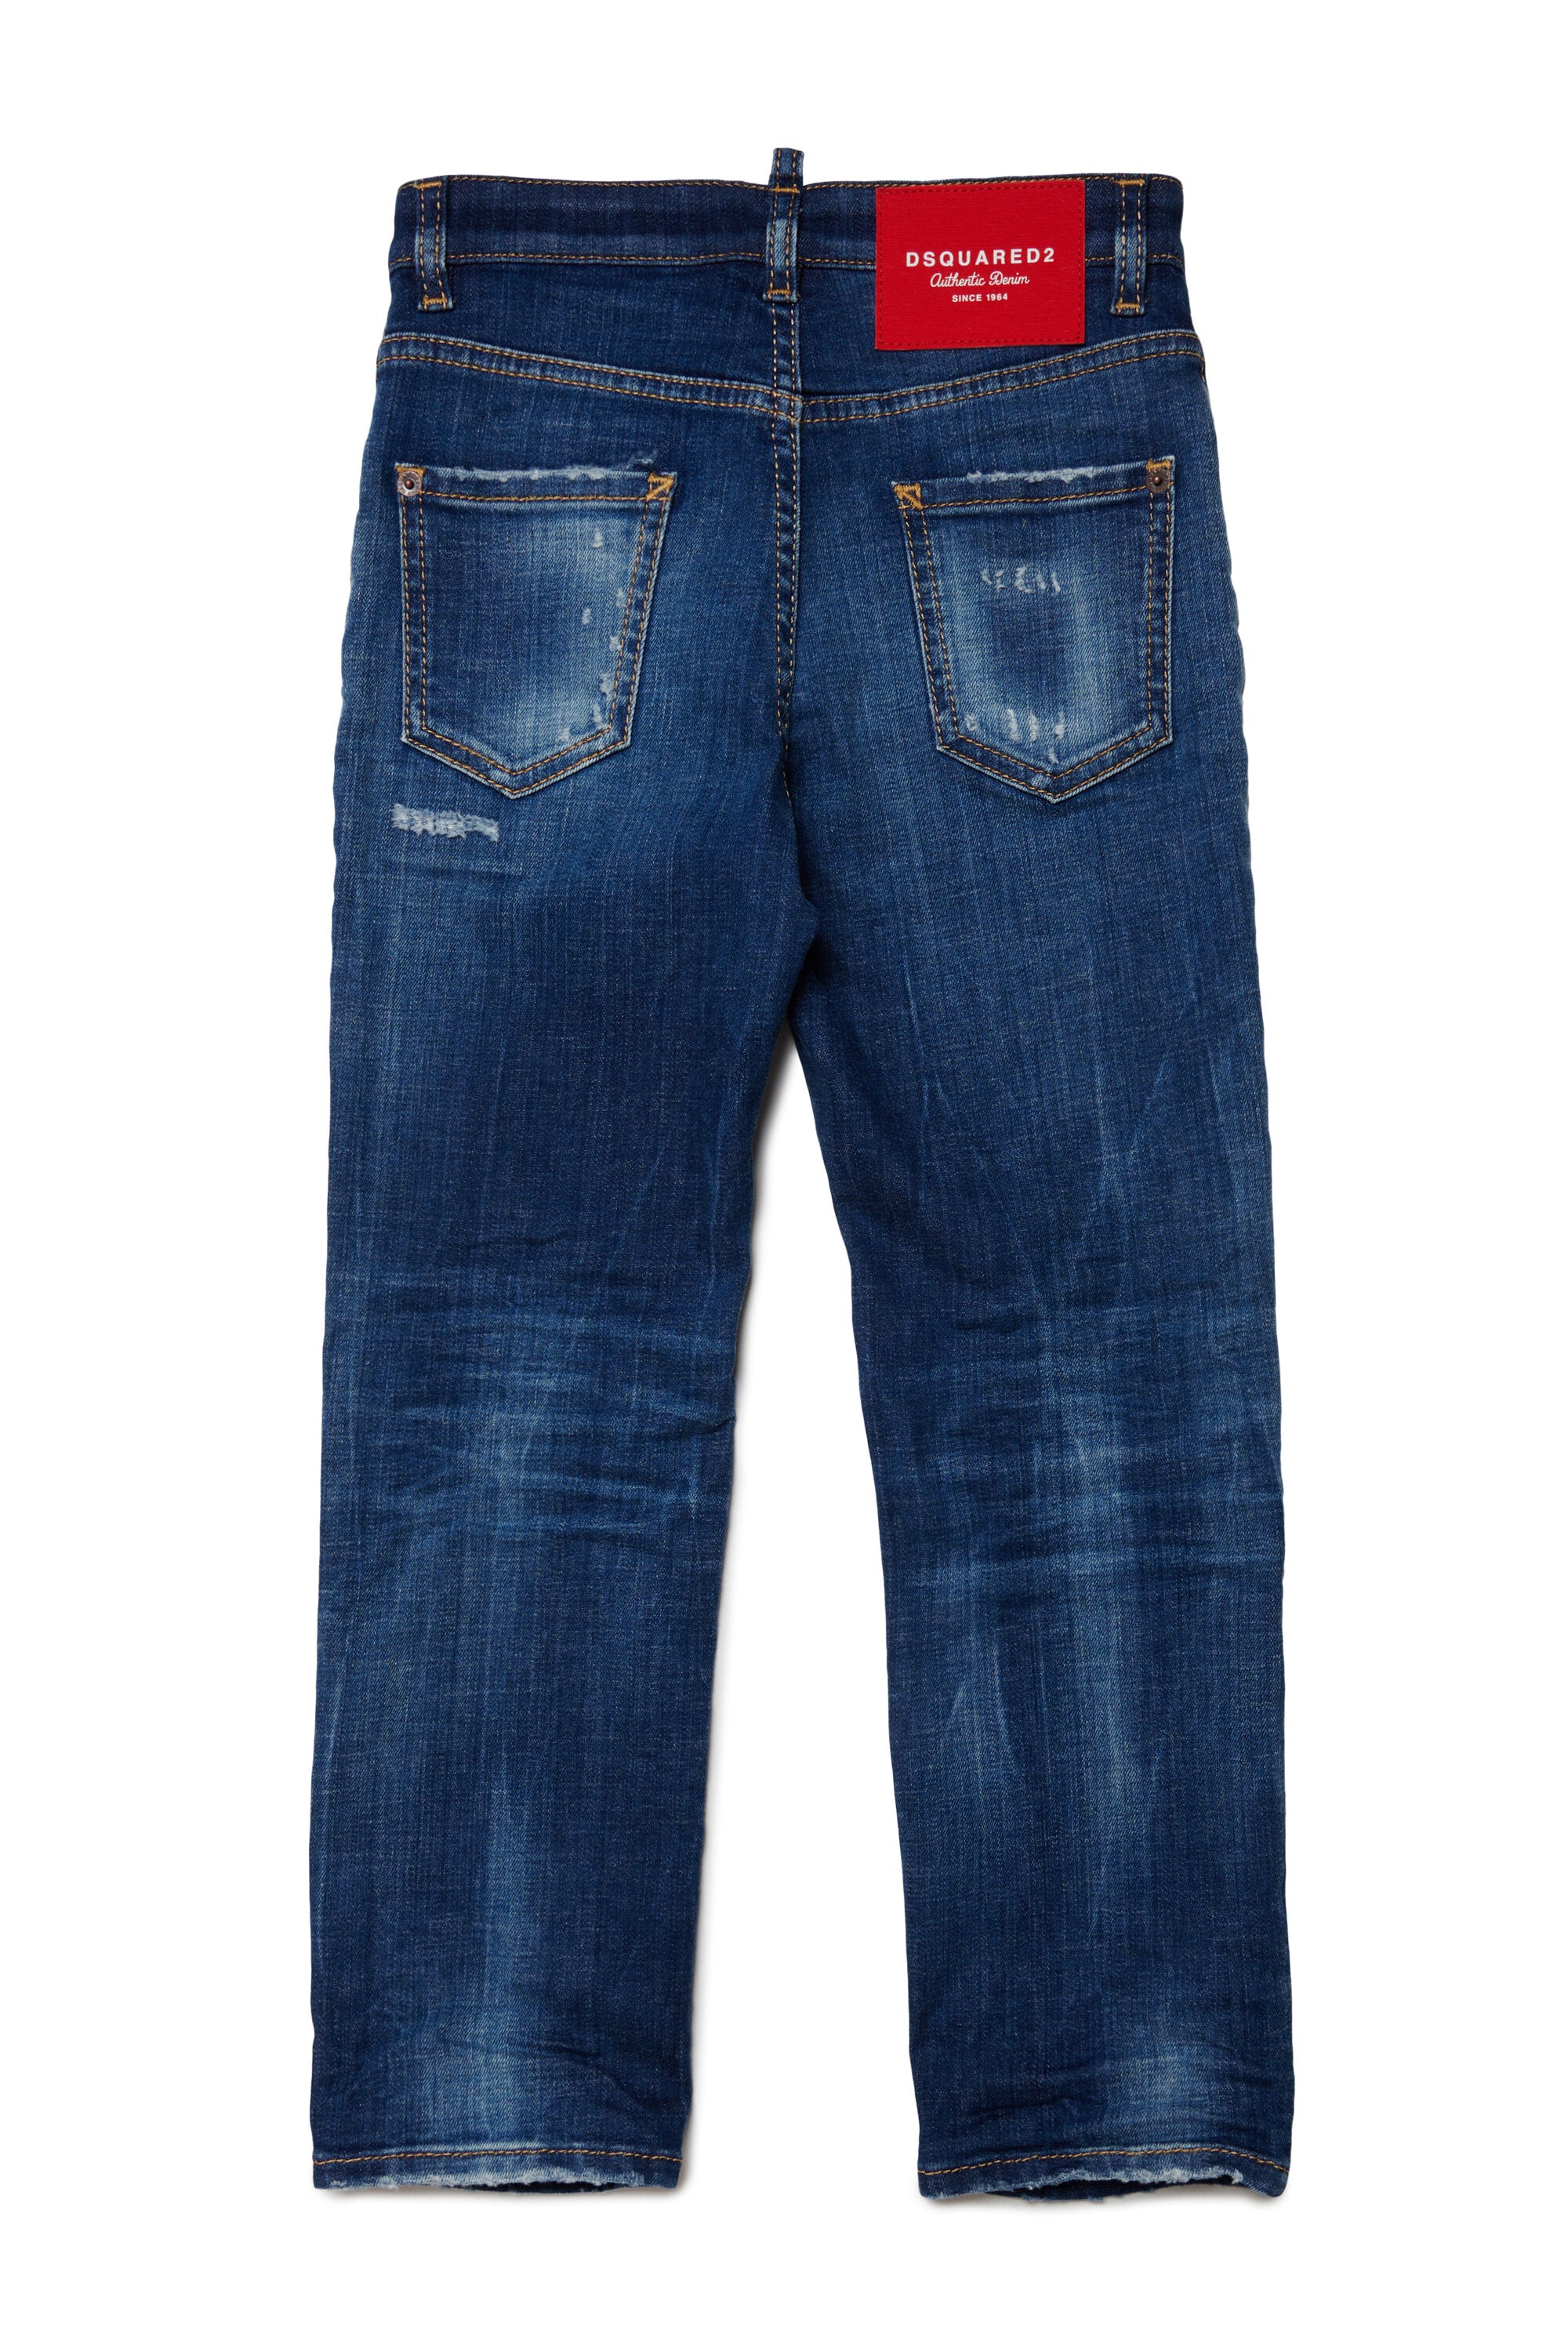 Shaded blue straight jeans with breaks - 642 Jean